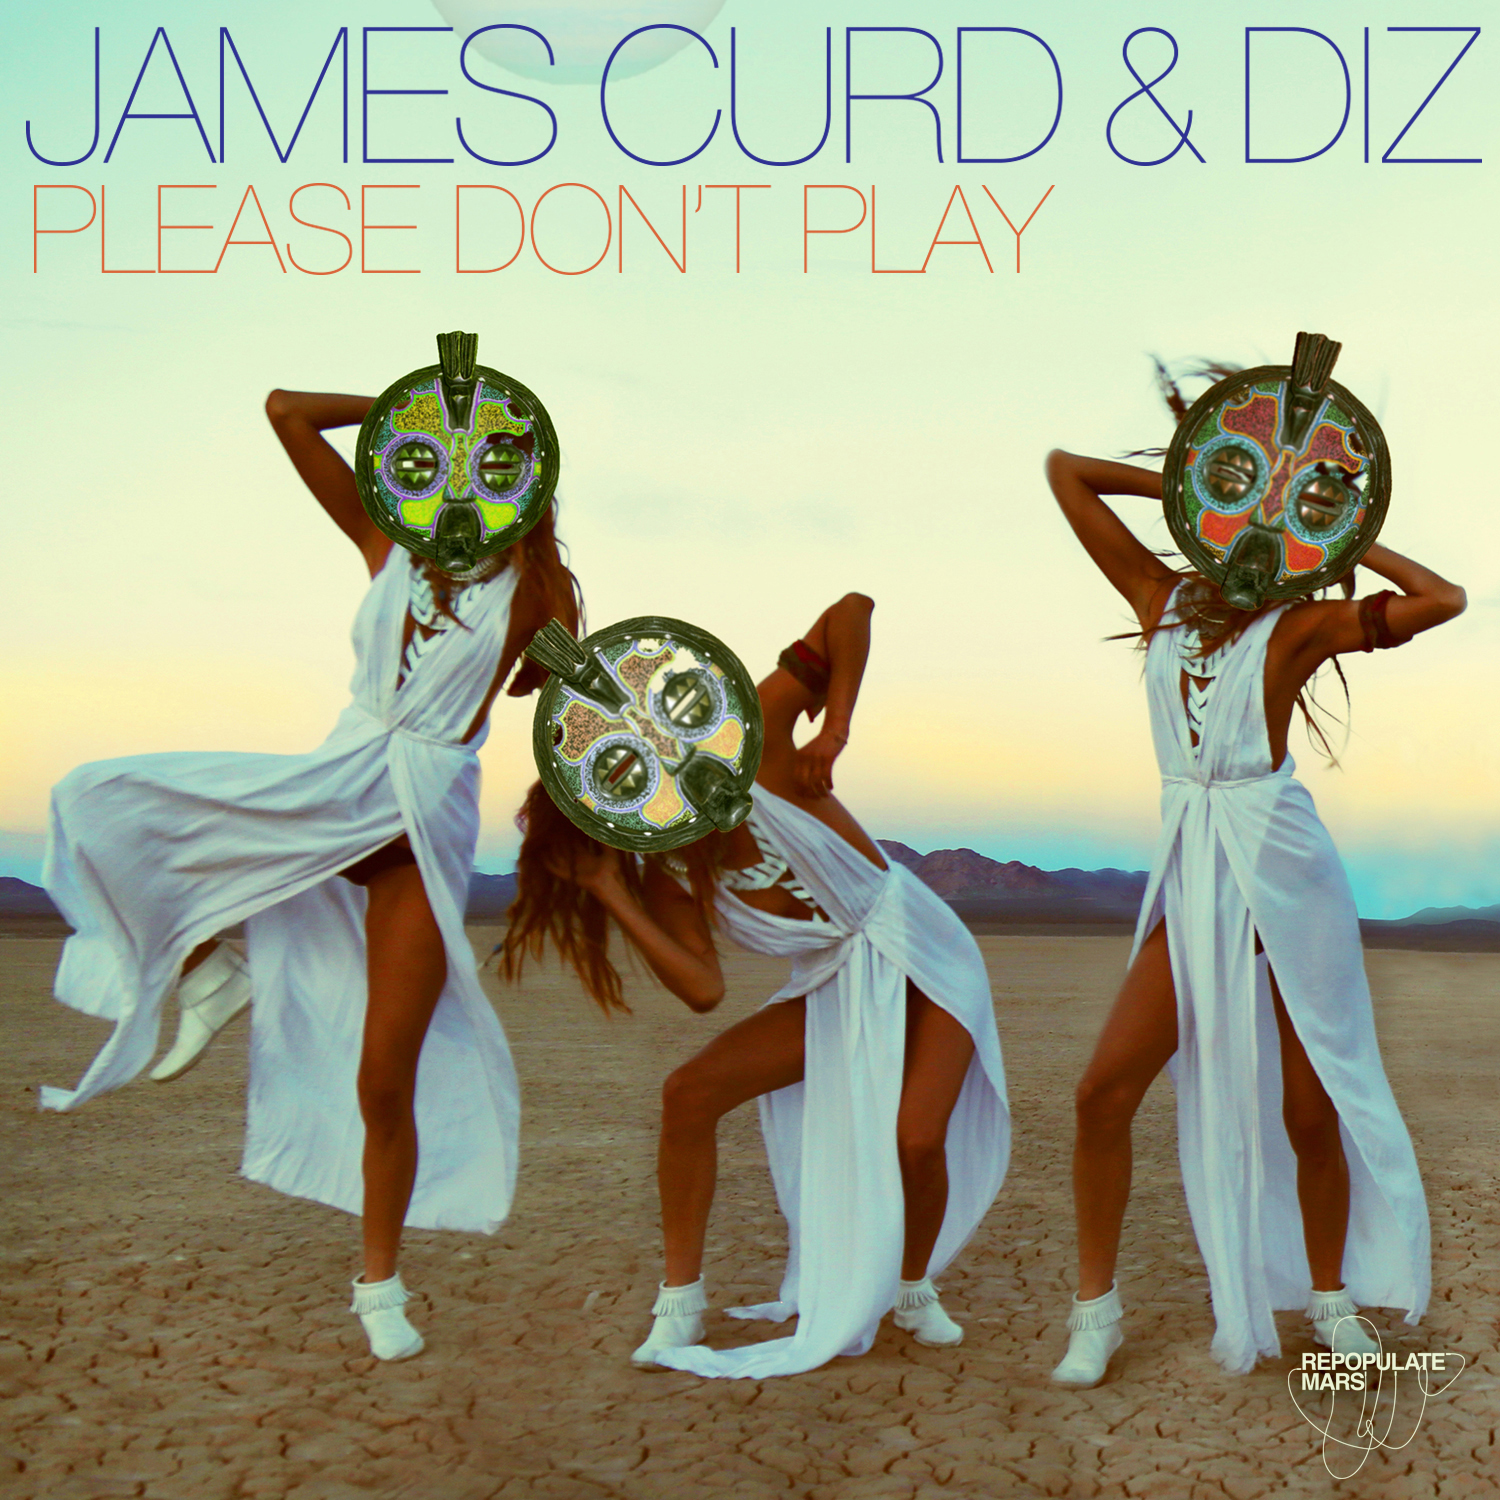 Please Don't Play (CamelPhat Remix)